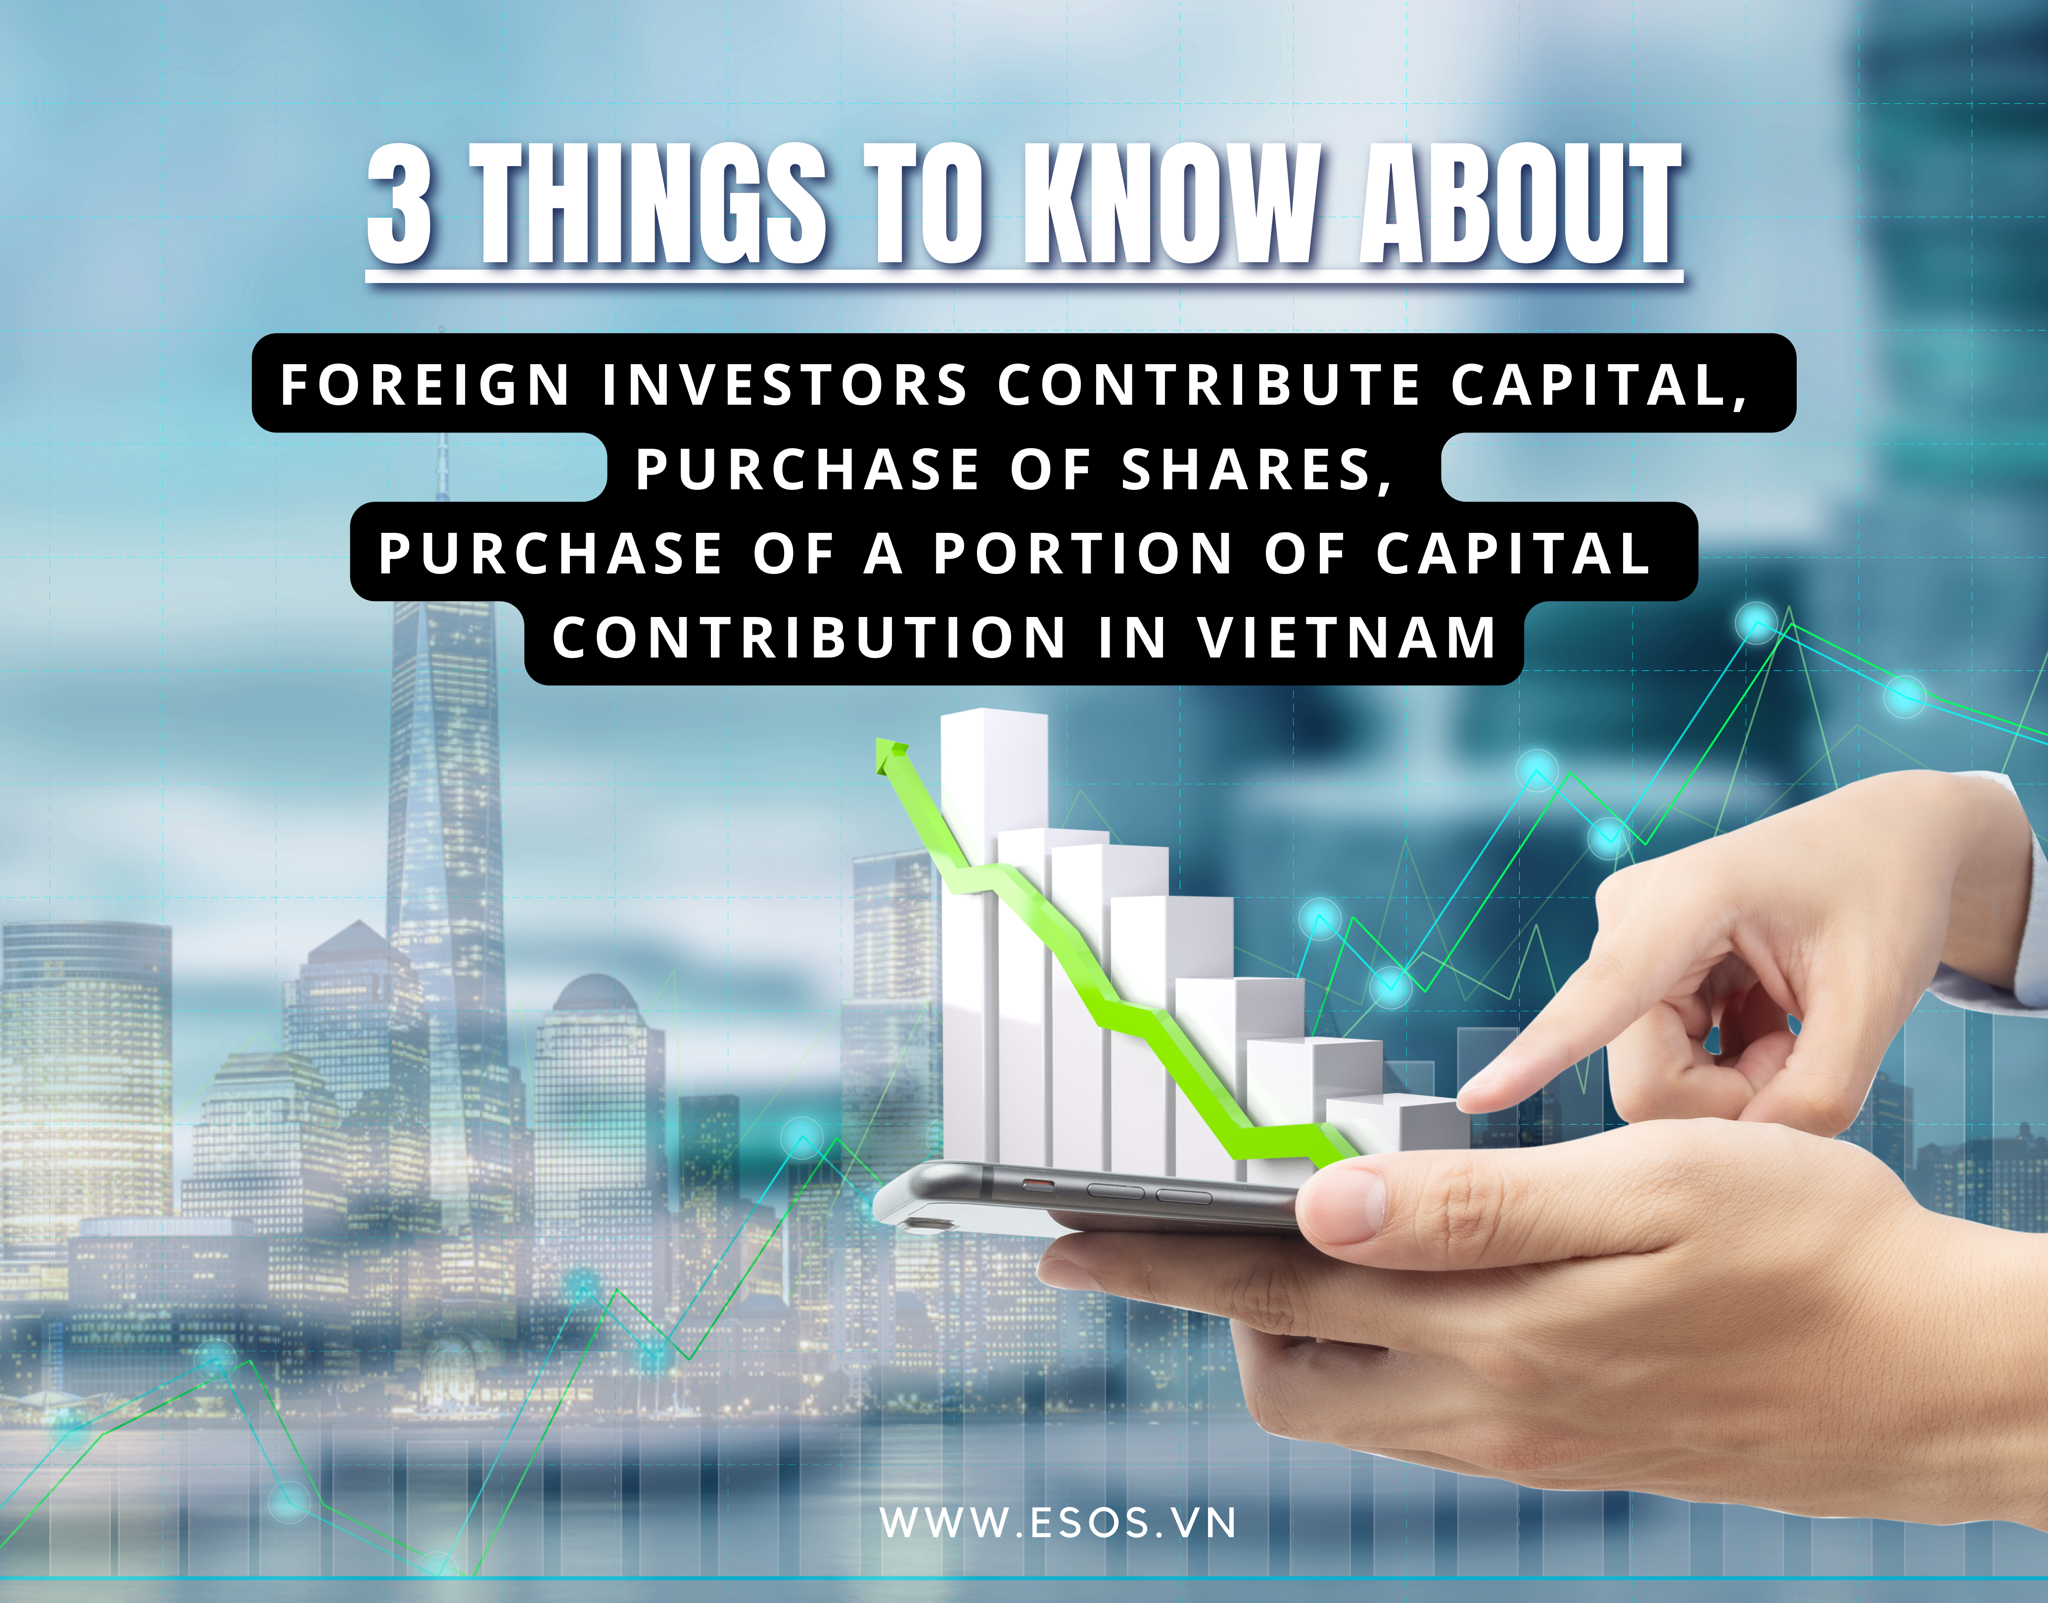 3 things to know about foreign investors buying shares, contributing capital,  or portion of capital contribution into Vietnam